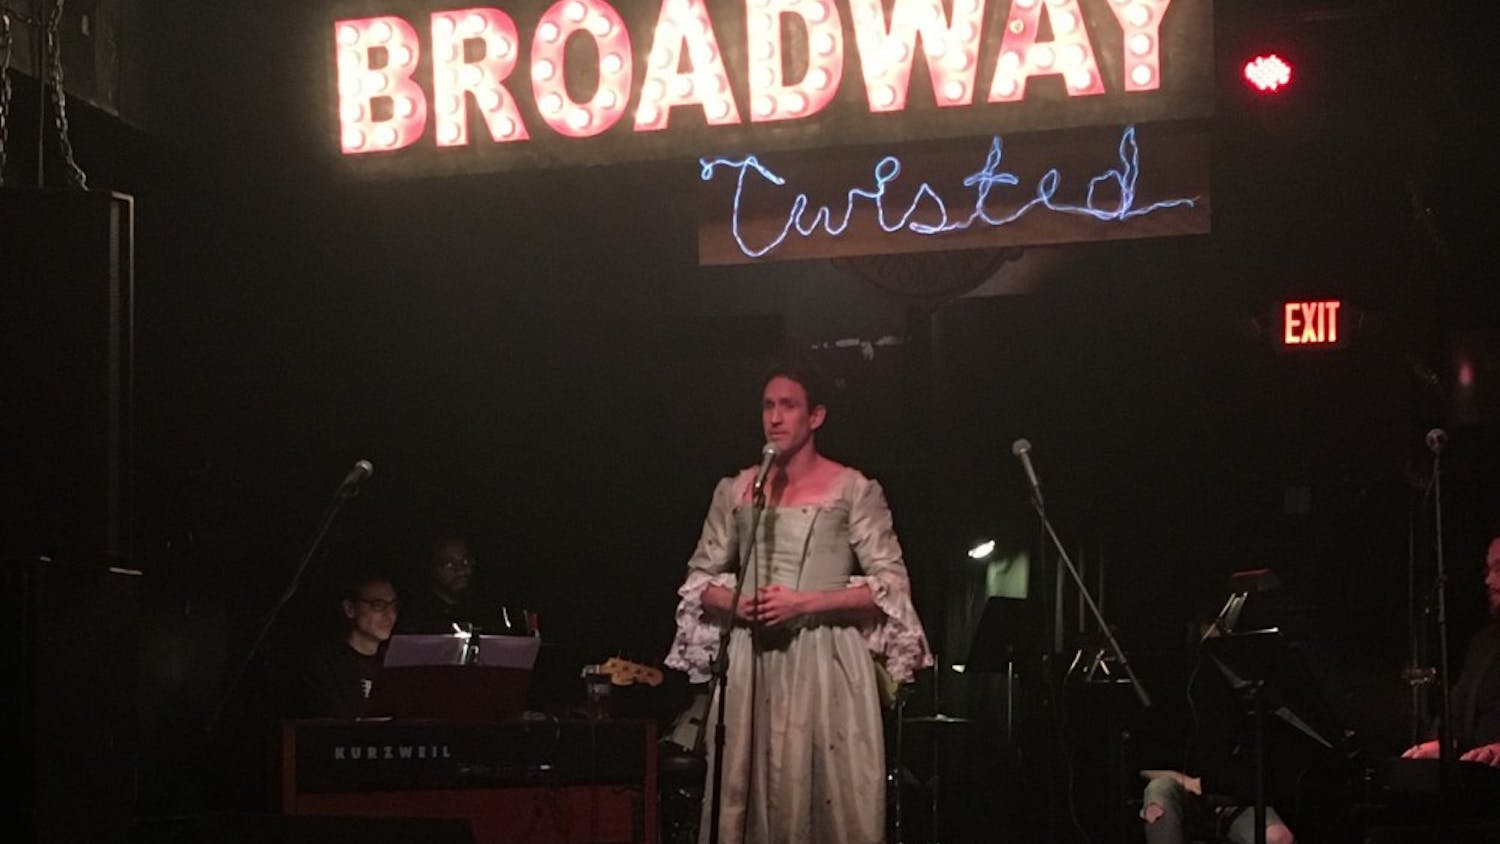 Schuyler mastain performs "Burn" from Hamilton at Local 506 on Monday to help raise awareness for HIV/AIDS with Broadway Twisted.